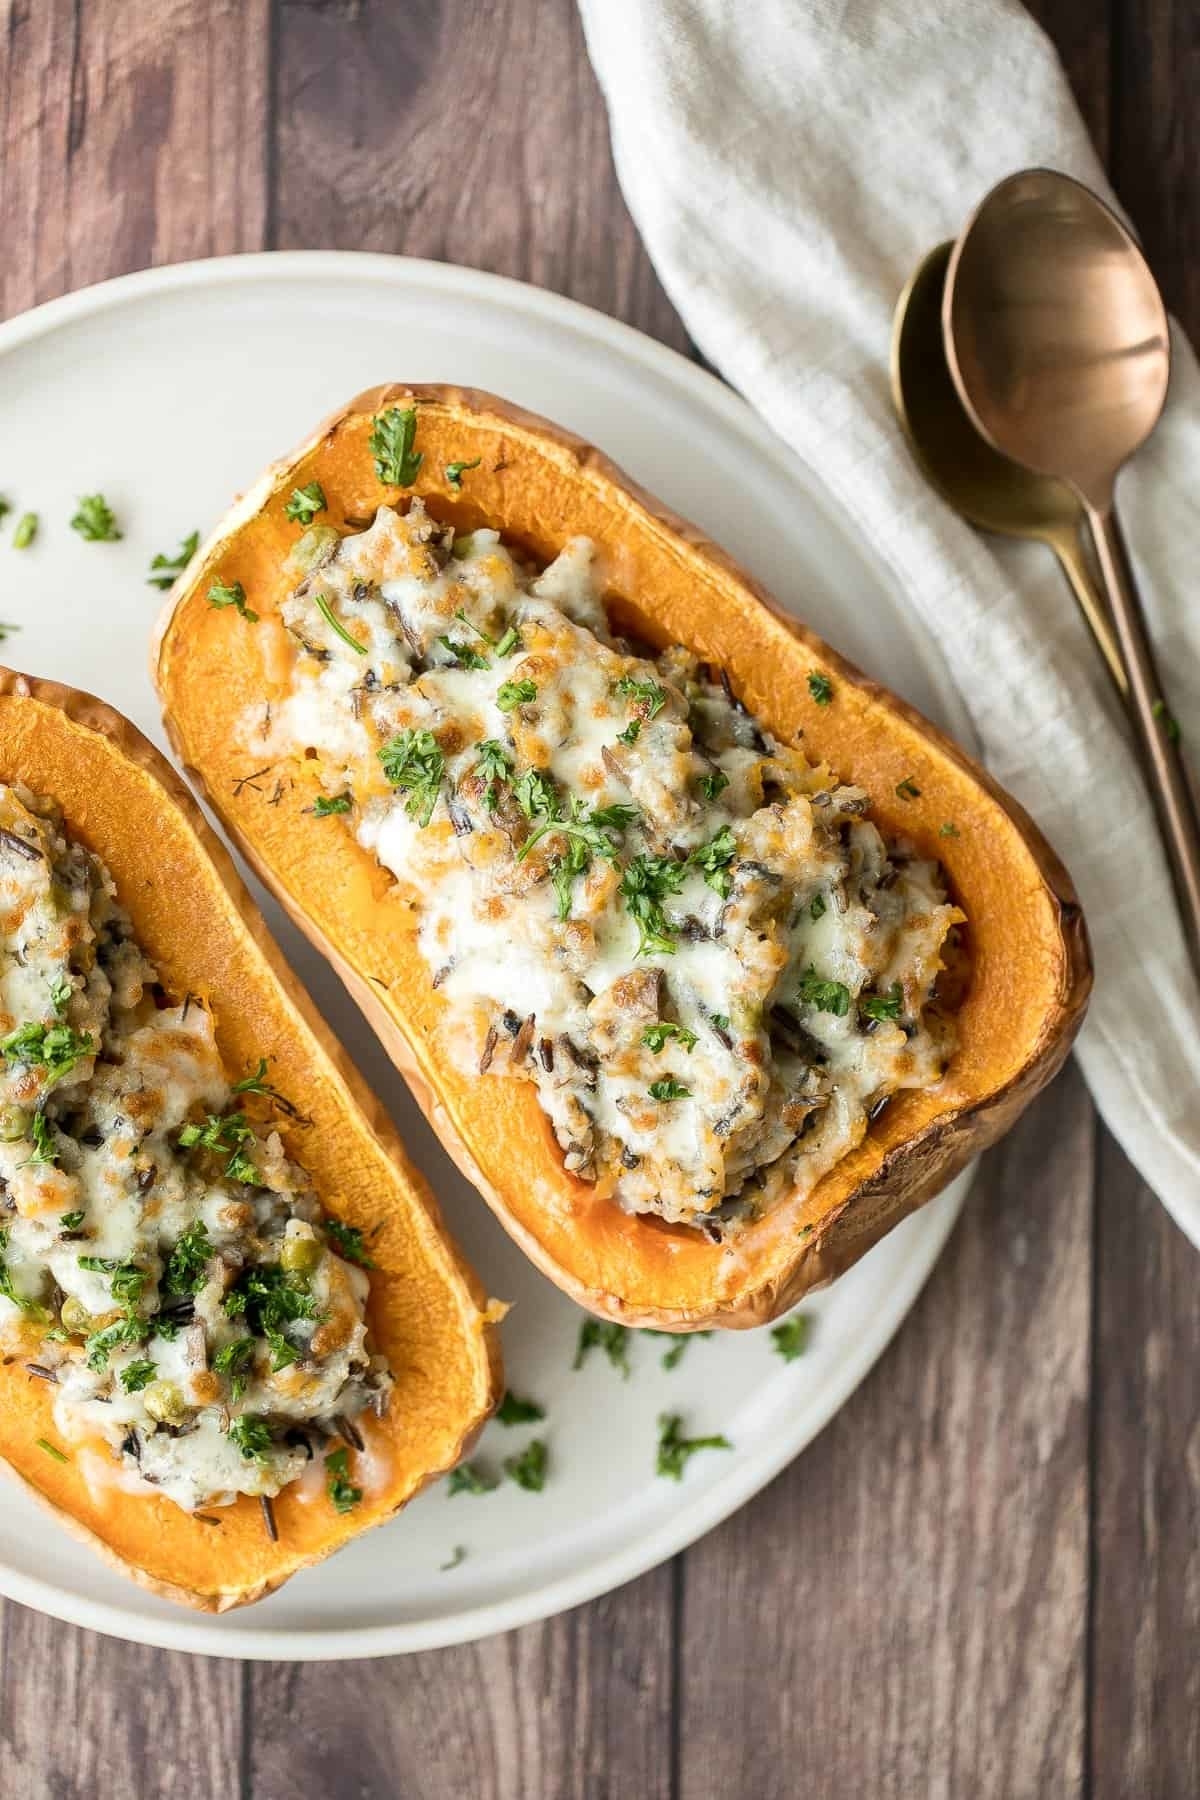 a butternut squash cut in half and stuffed with rice and cheese